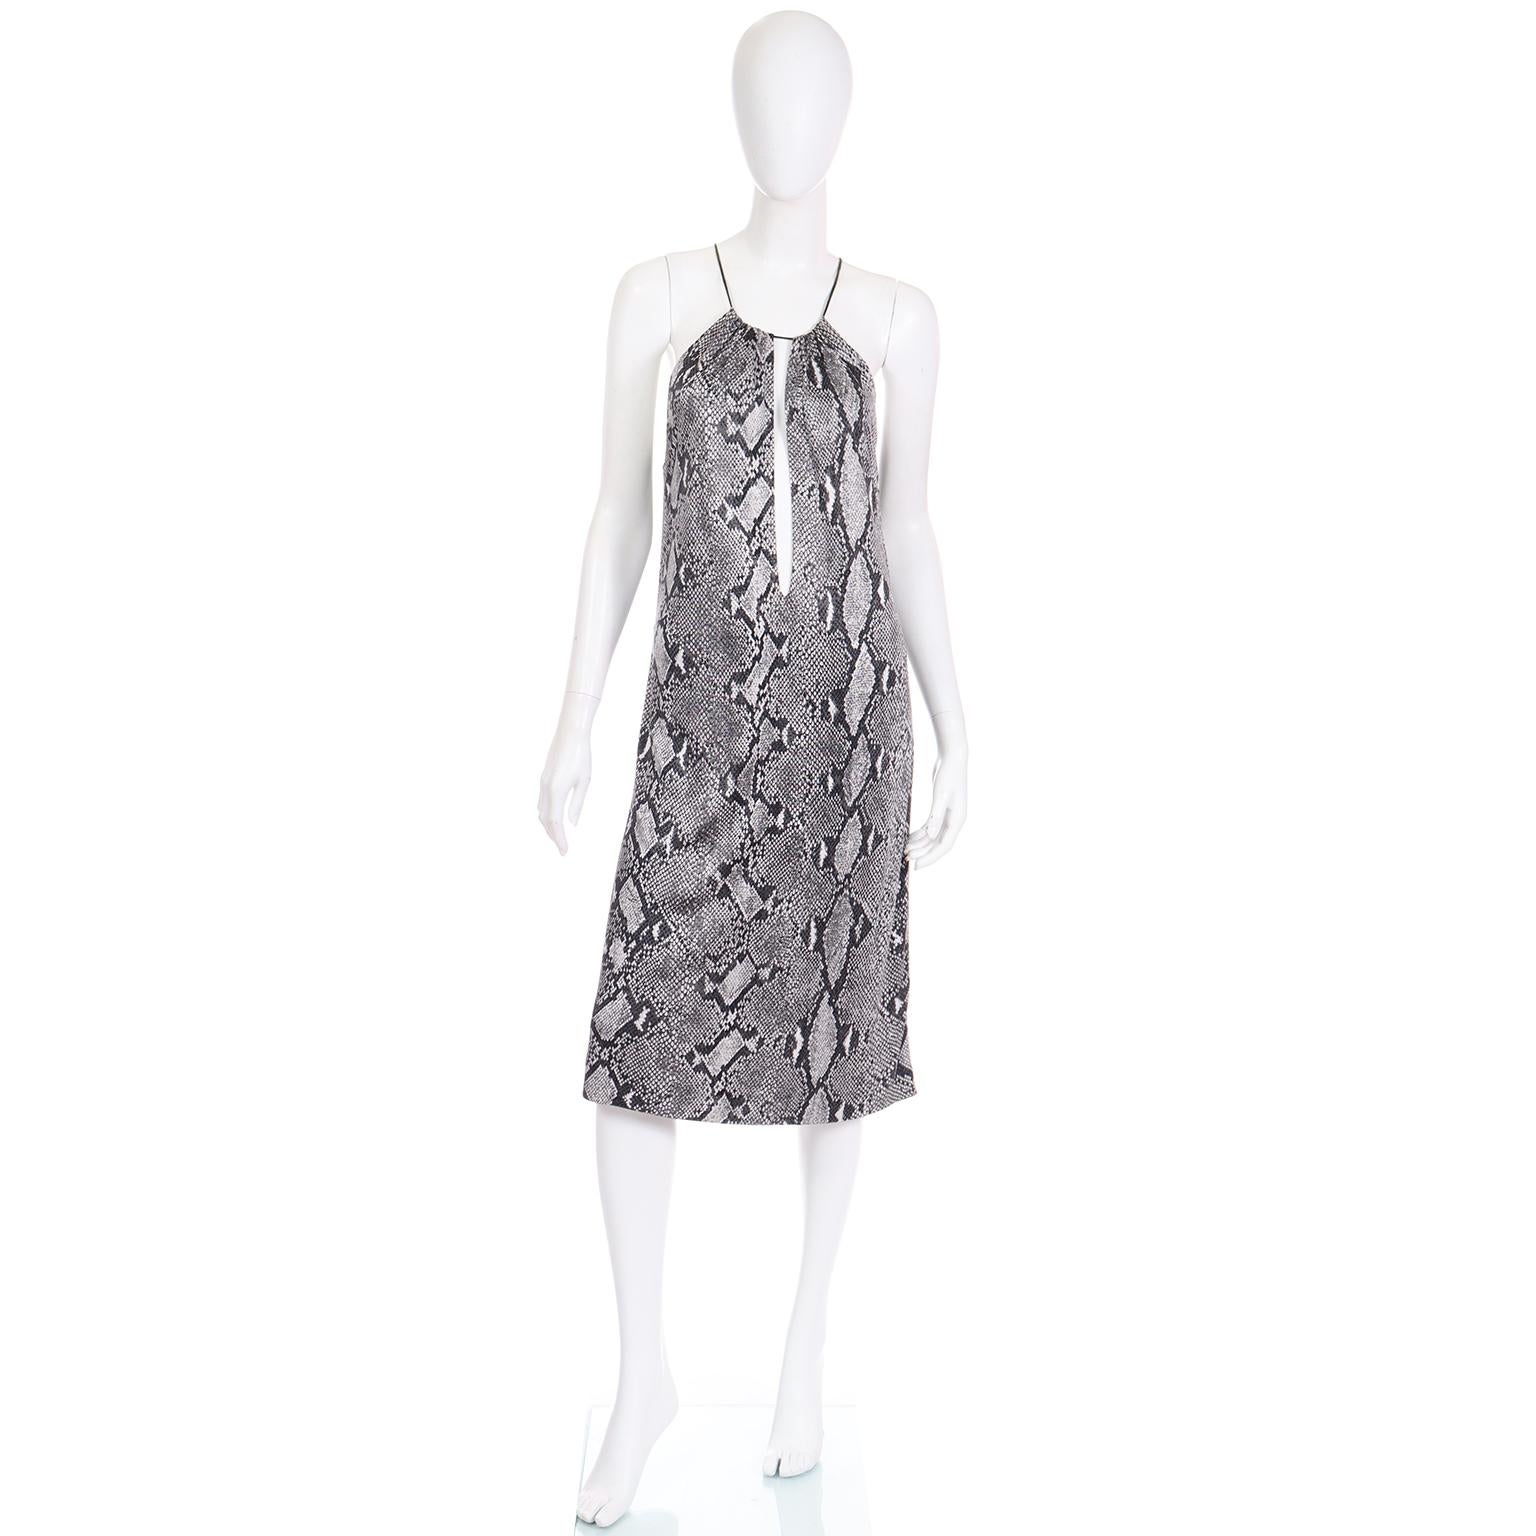 Gray Tom Ford For Gucci S/S 2000 Runway Python Print Rayon Dress w Plunging V For Sale